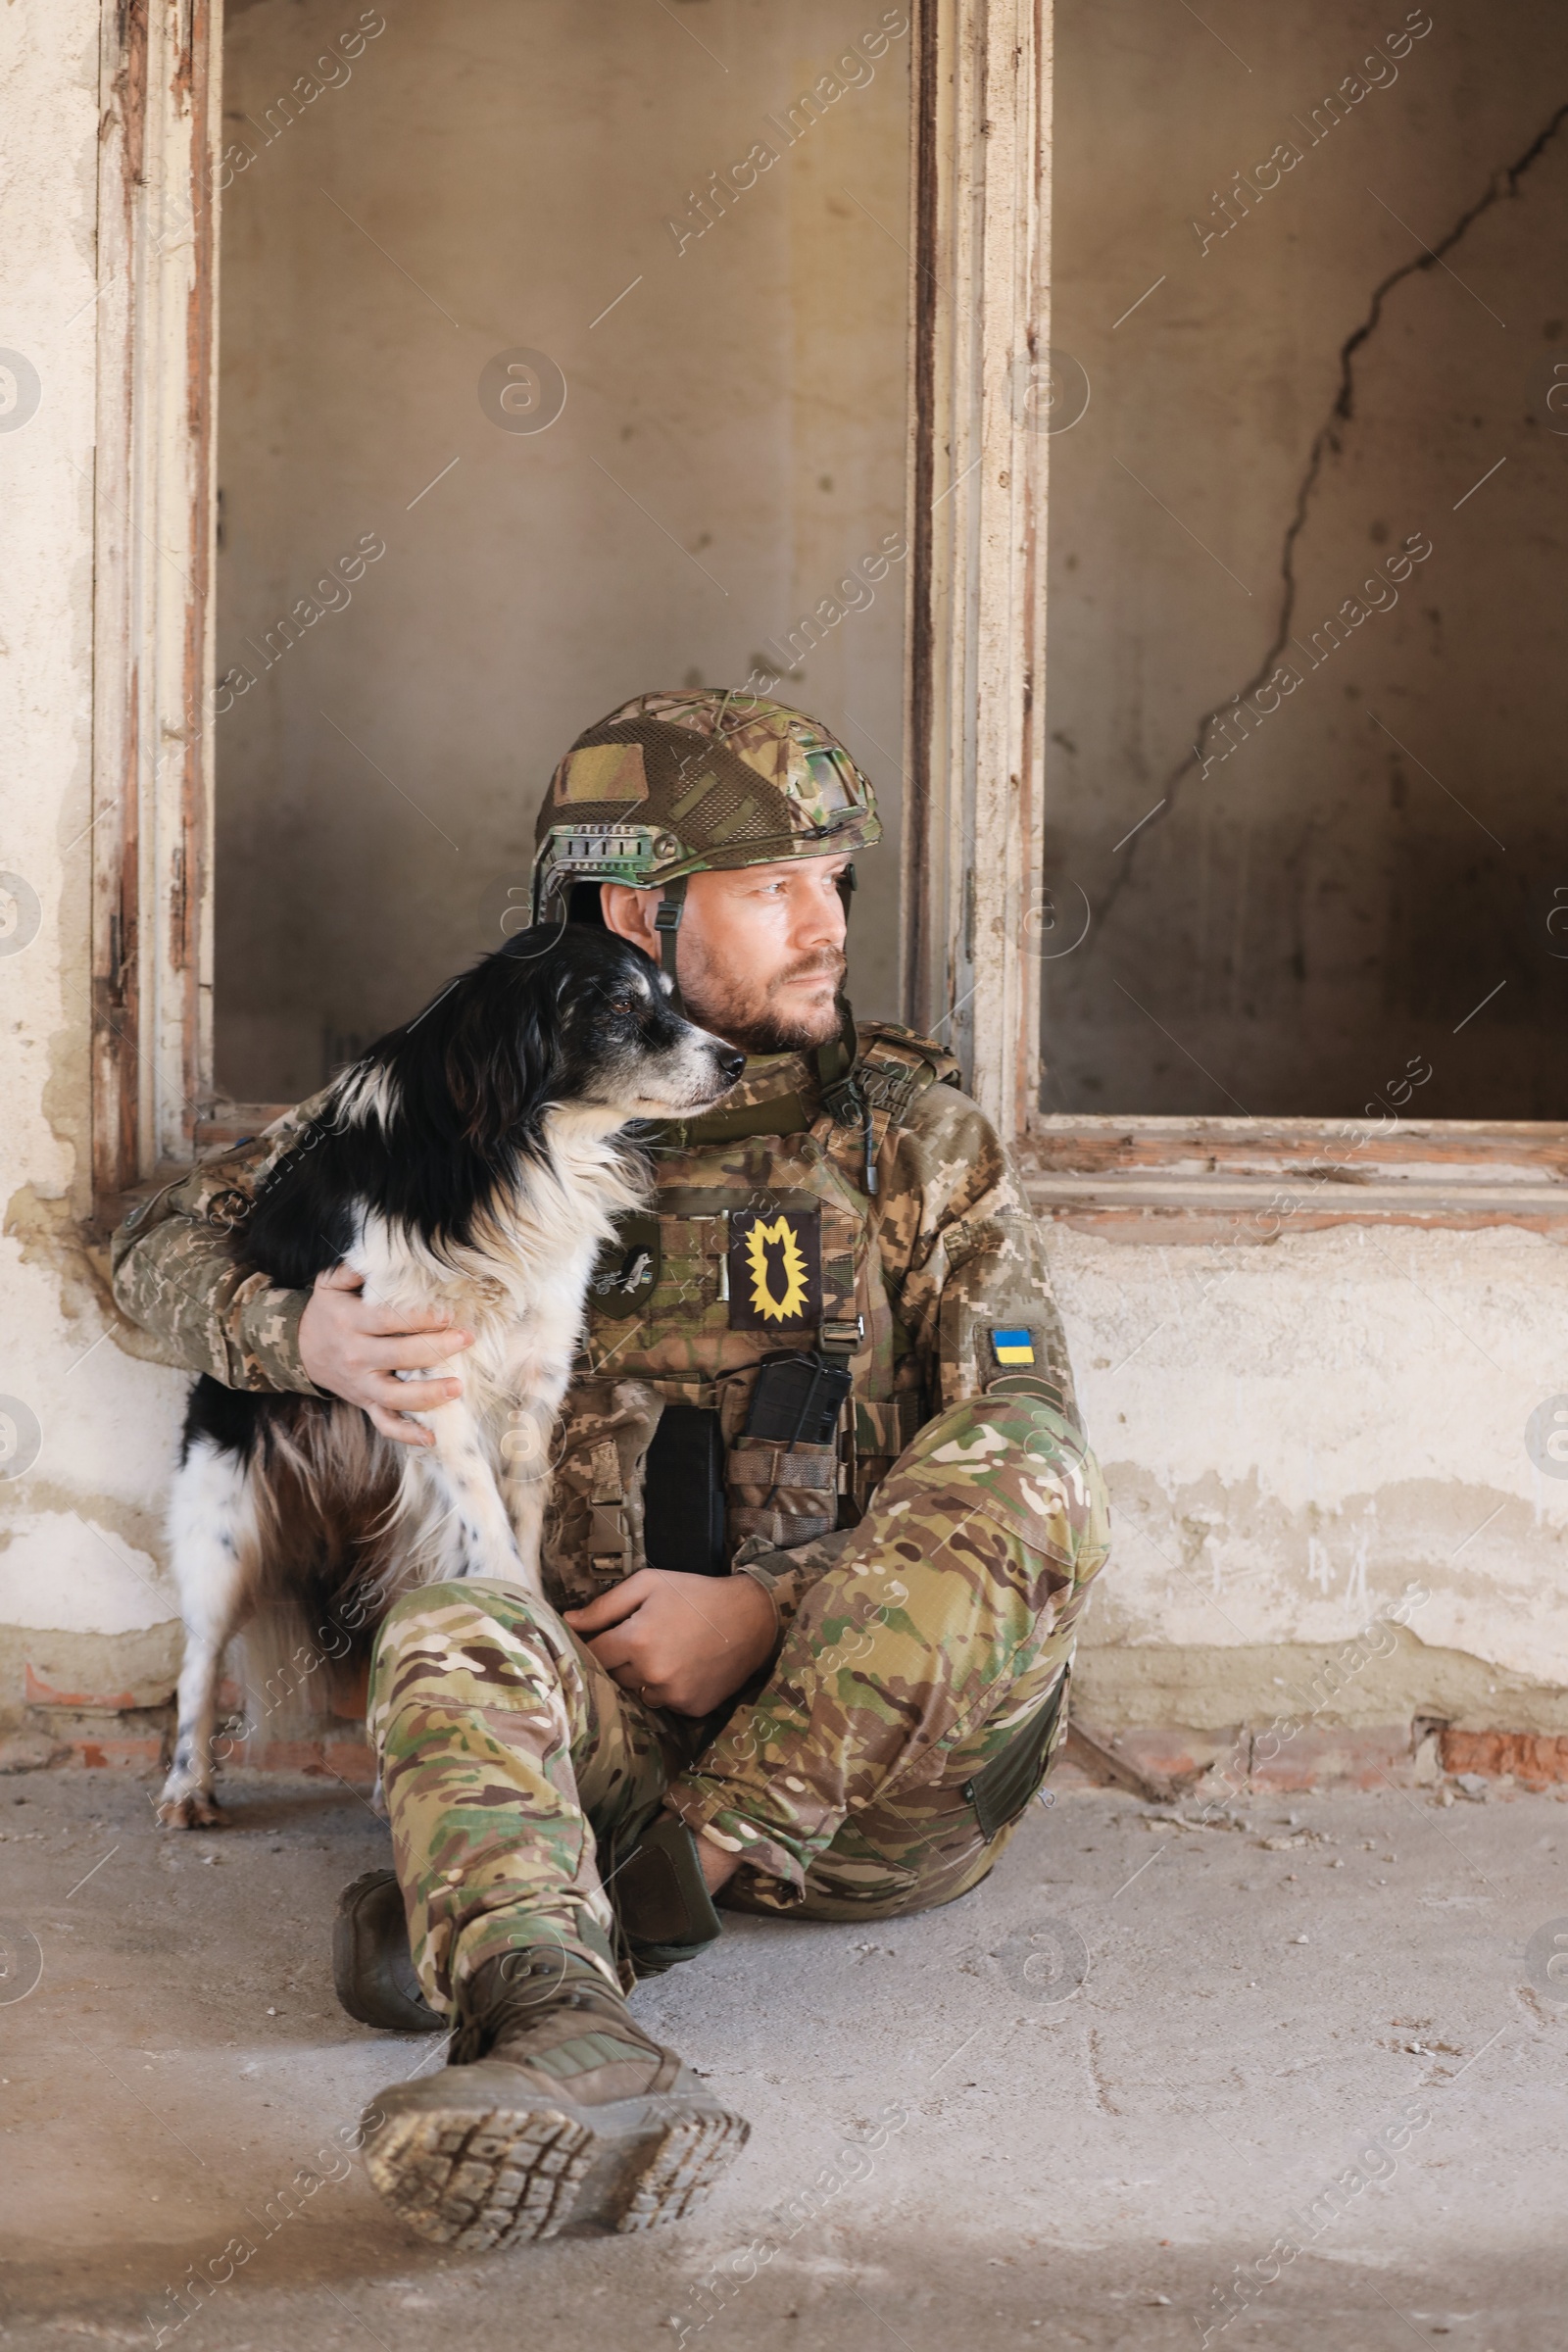 Photo of Ukrainian soldier sitting with stray dog in abandoned building